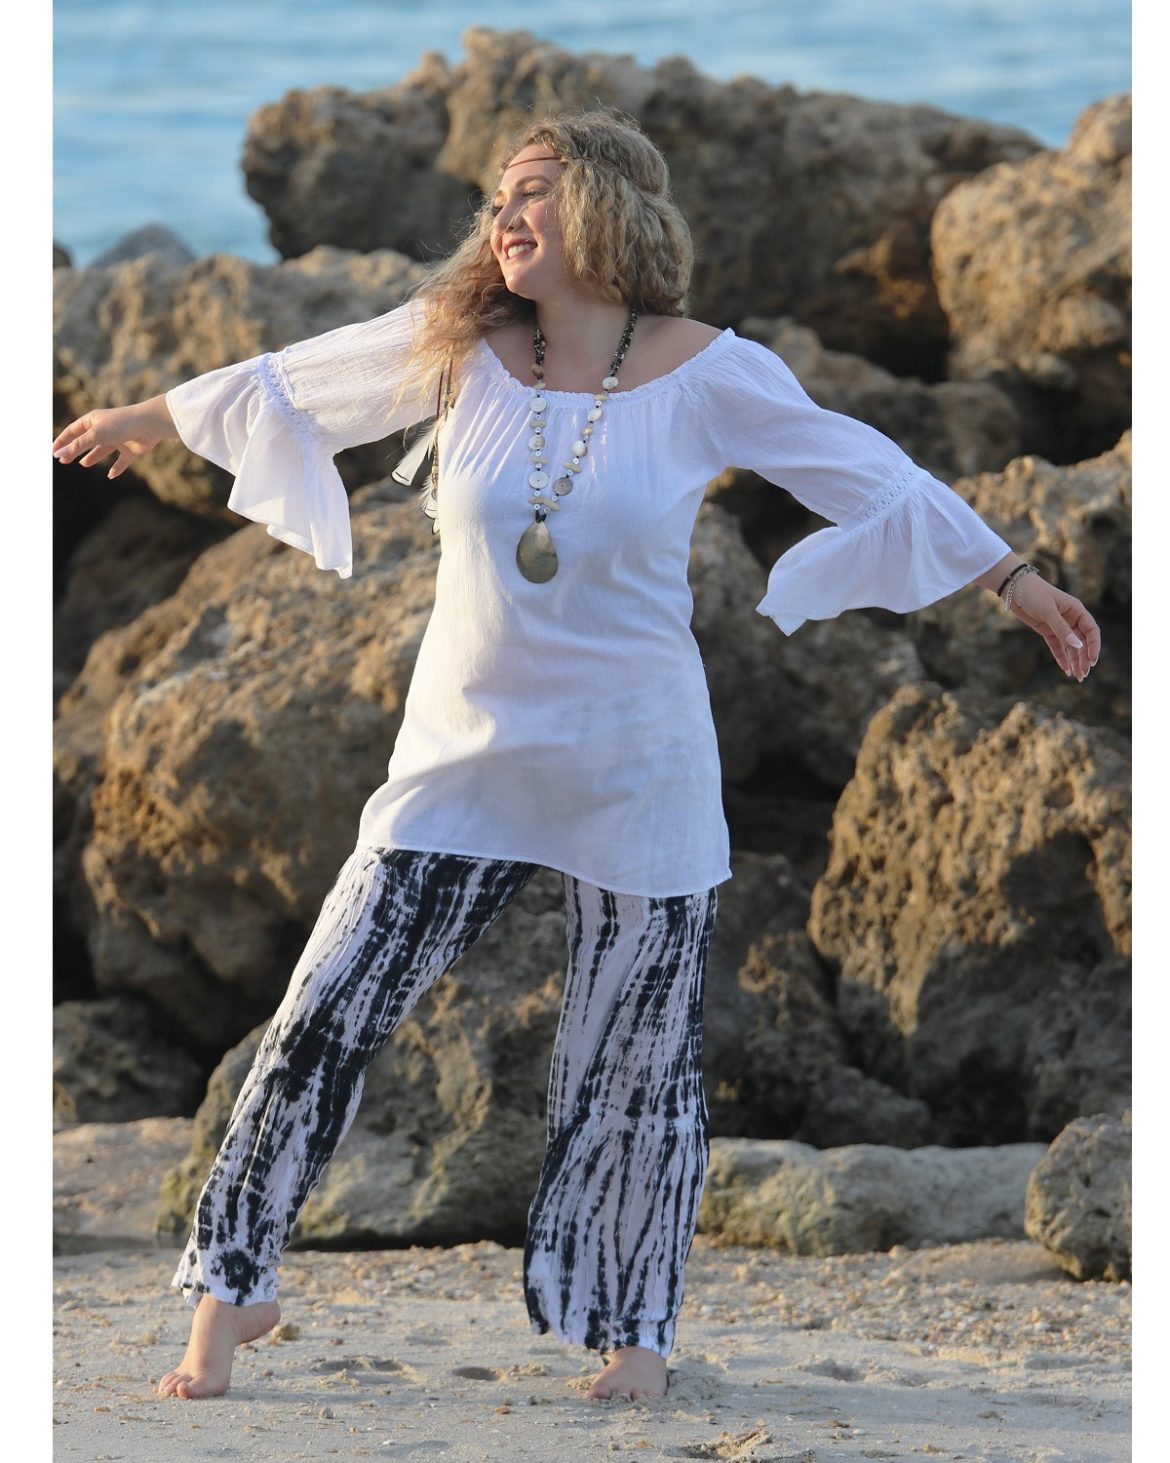 Boho-Chic-Blouse-Harmony-White-front-view-model-on-beach-outstretched arms